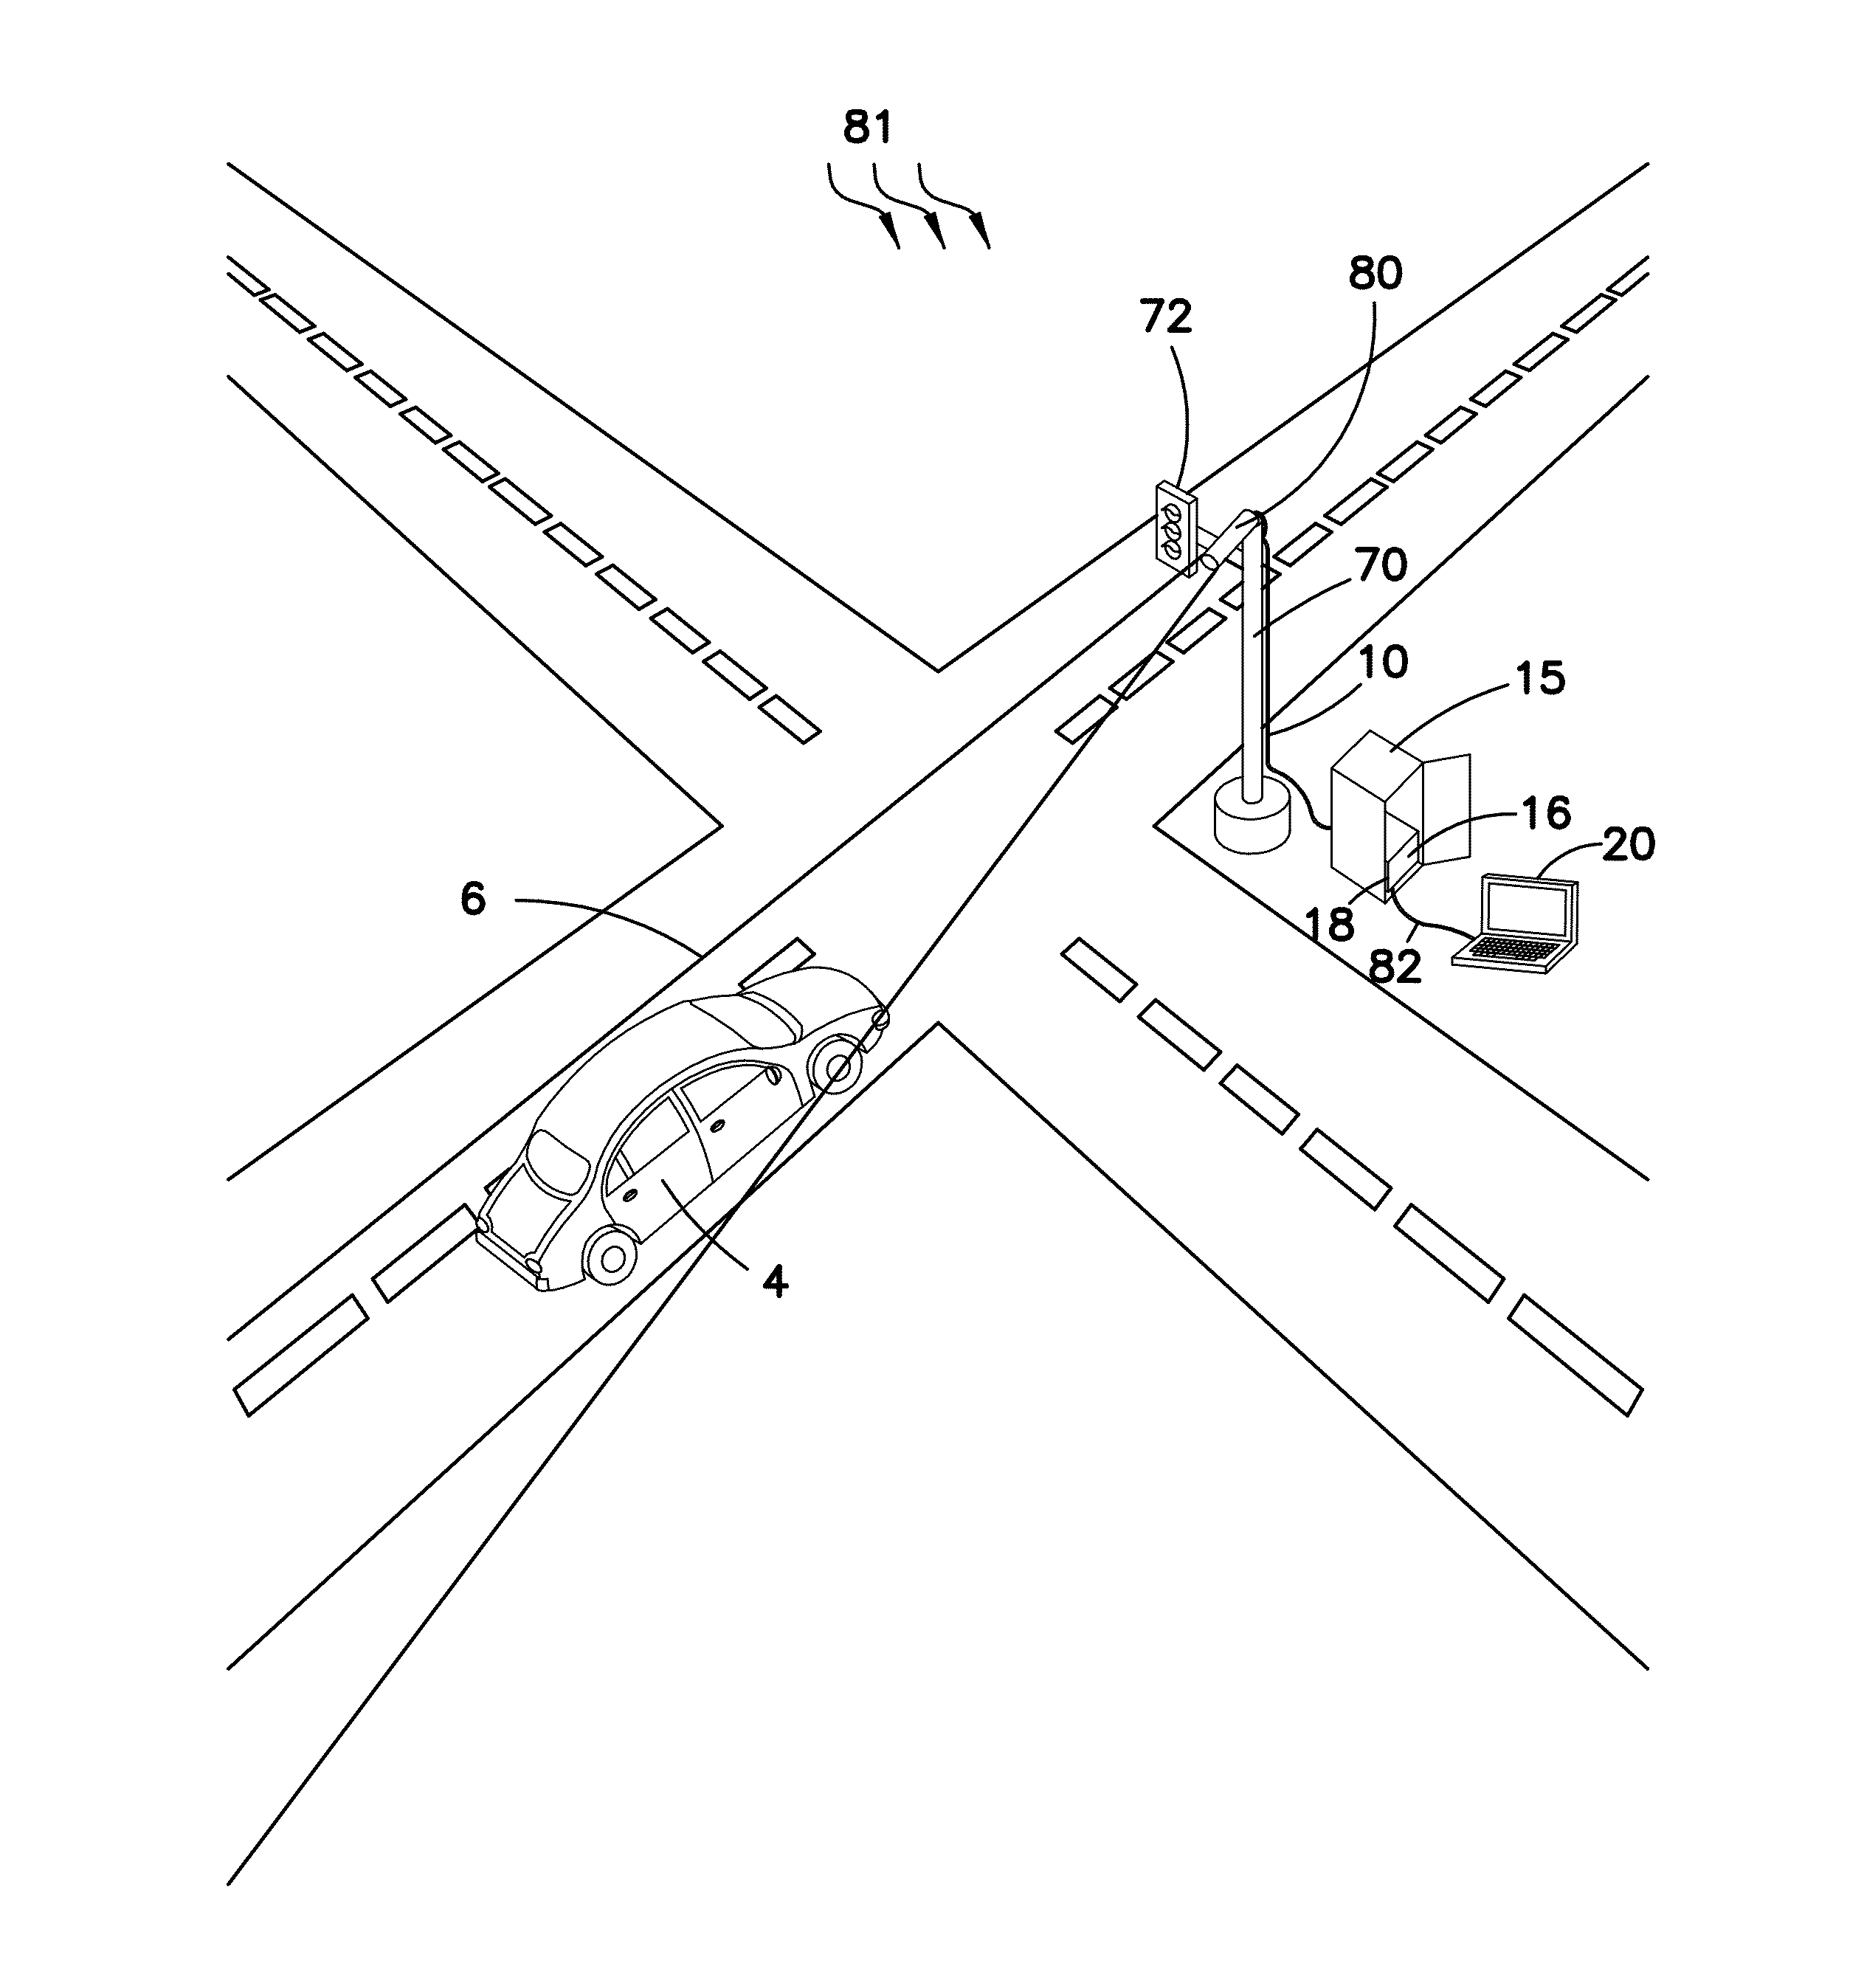 System and method for configuring a traffic control sensor system